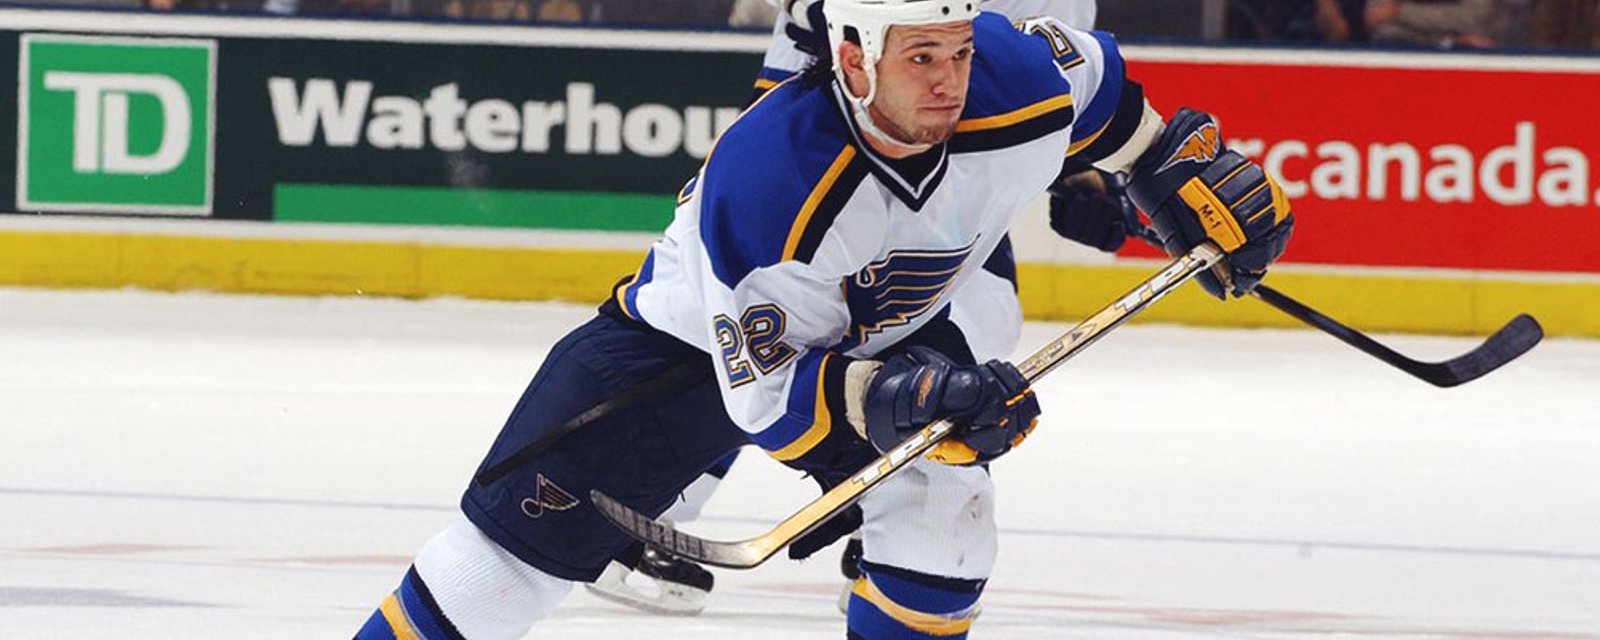 Controversial ex-NHLer and convicted felon wants back in the USA